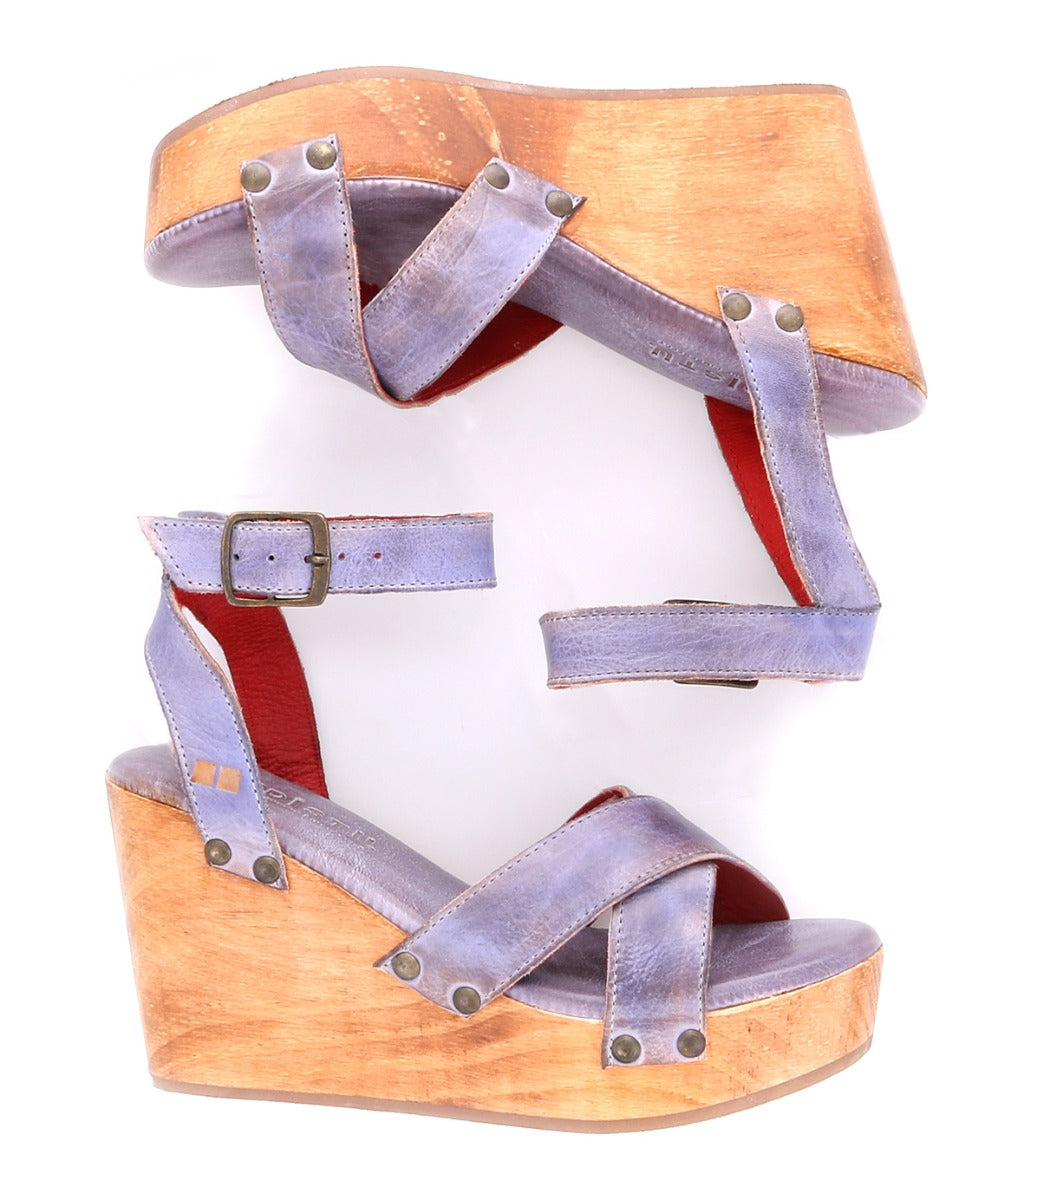 A pair of Grettell wedge sandals with wooden straps by Bed Stu.